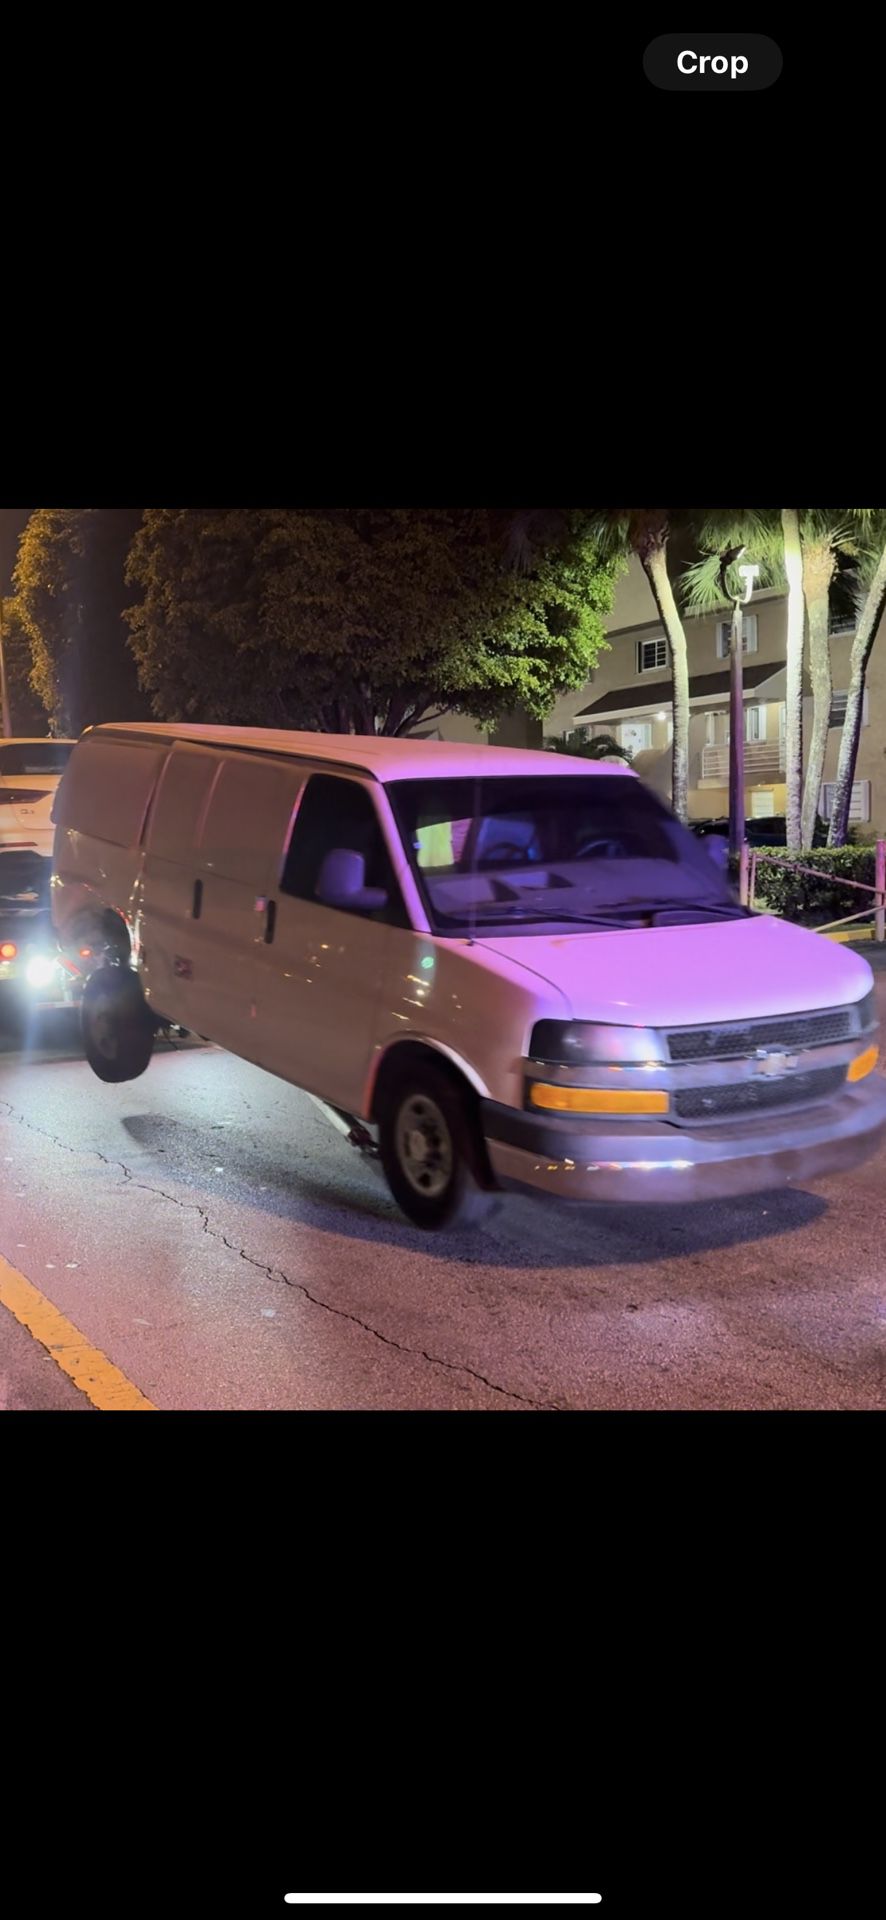 Chevy Express 